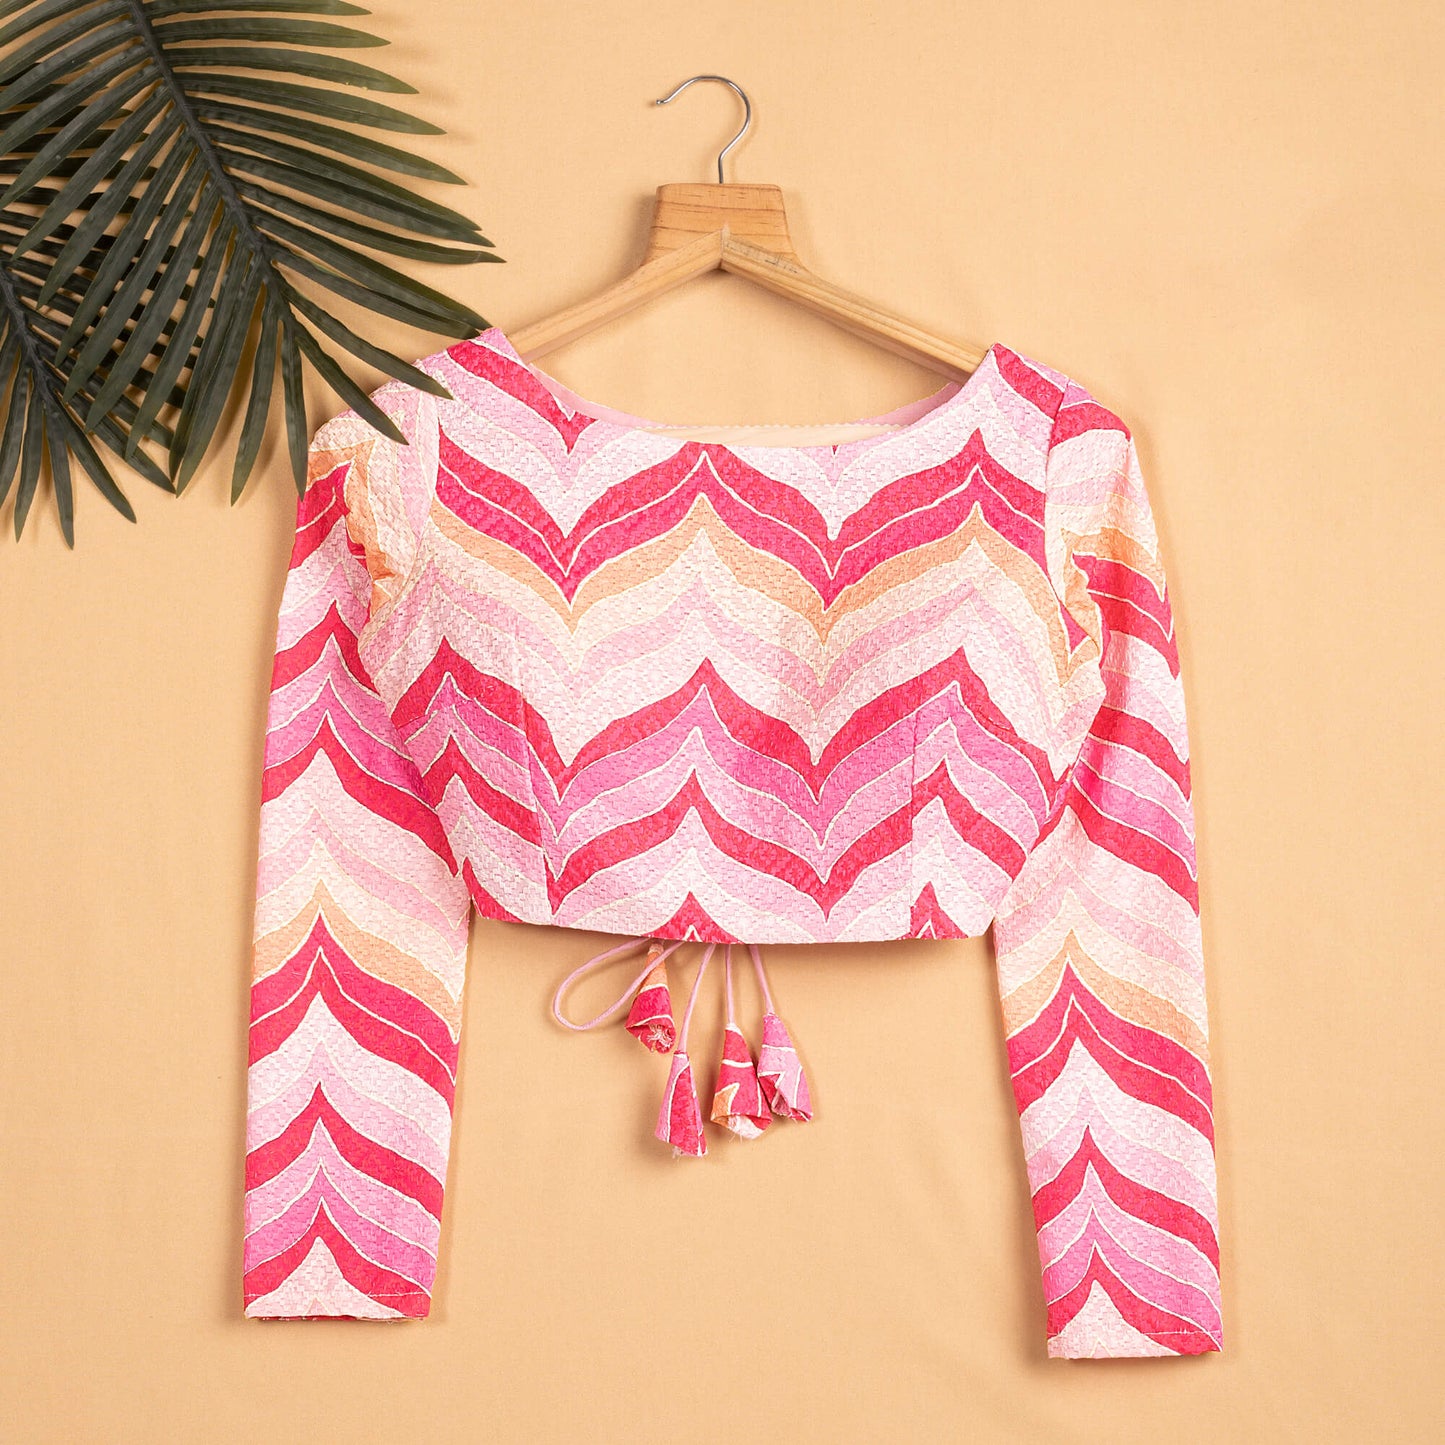 Chevron Printed Embroidery Muslin Blouse